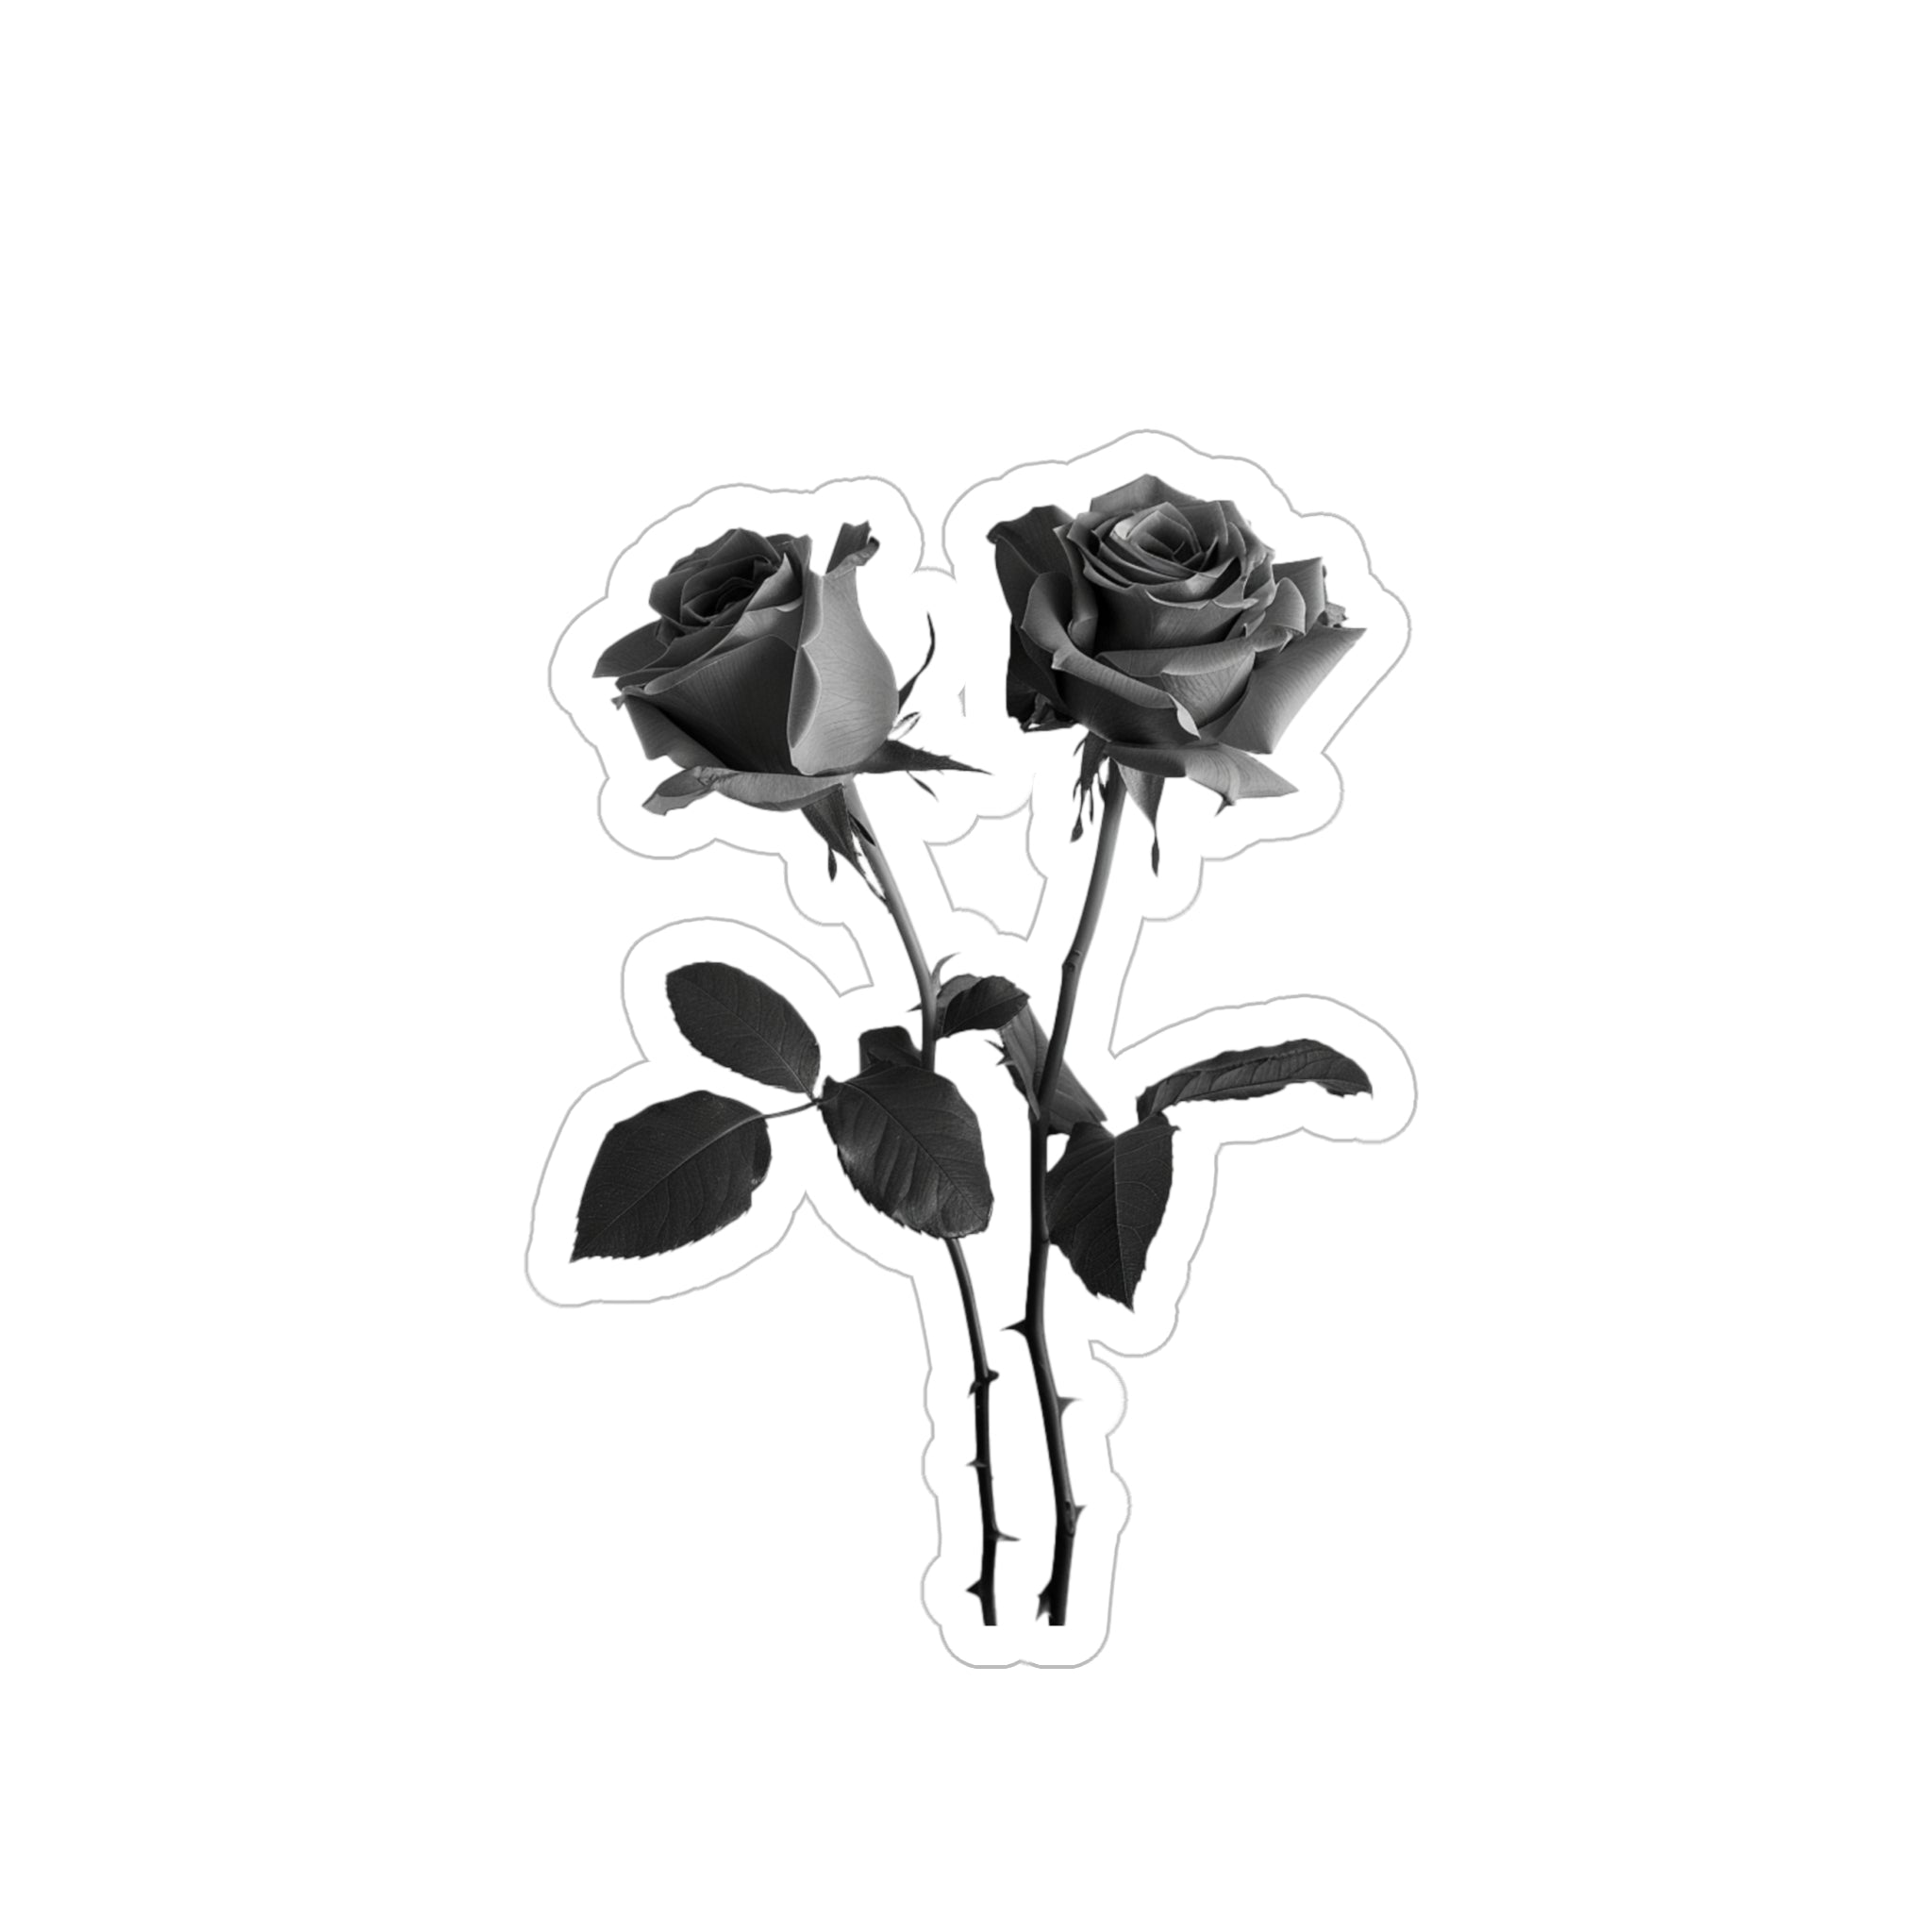 Black and white two roses die-cut transparent sticker, made from water-resistant vinyl. Available in 4 sizes for indoor and outdoor use. Customize laptops, phone cases, cars, and more. Please note: Design may be difficult to see on dark surfaces, and small details may be cut as one shape. Assembled in the USA from globally sourced parts. Infuse your belongings with timeless charm and natural beauty.